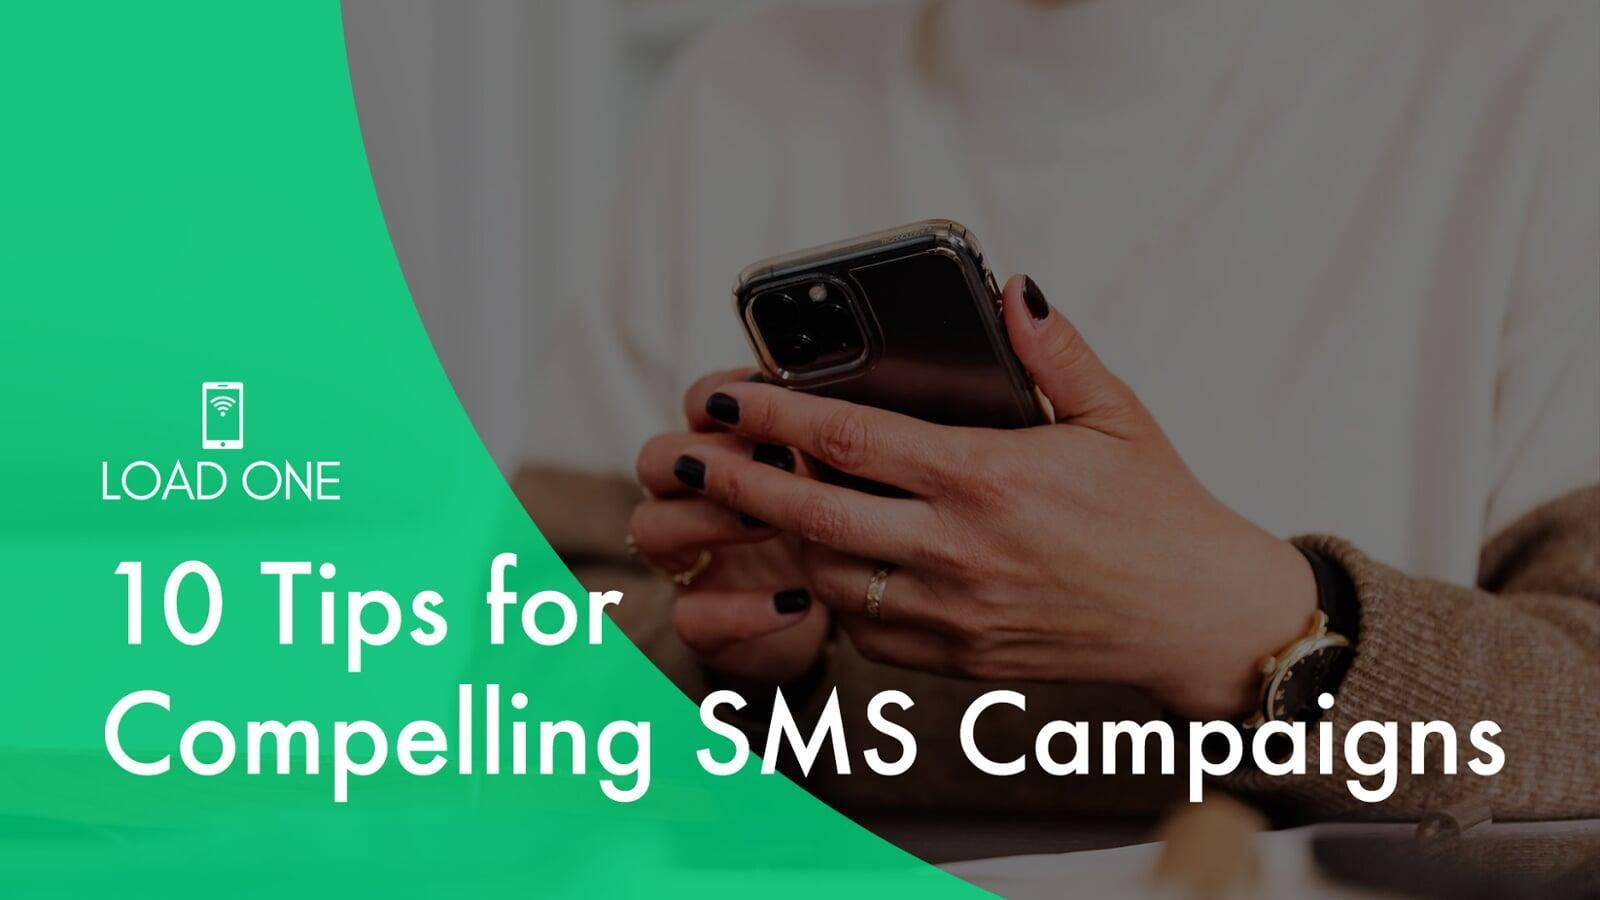 10 Tips for Compelling SMS Campaigns